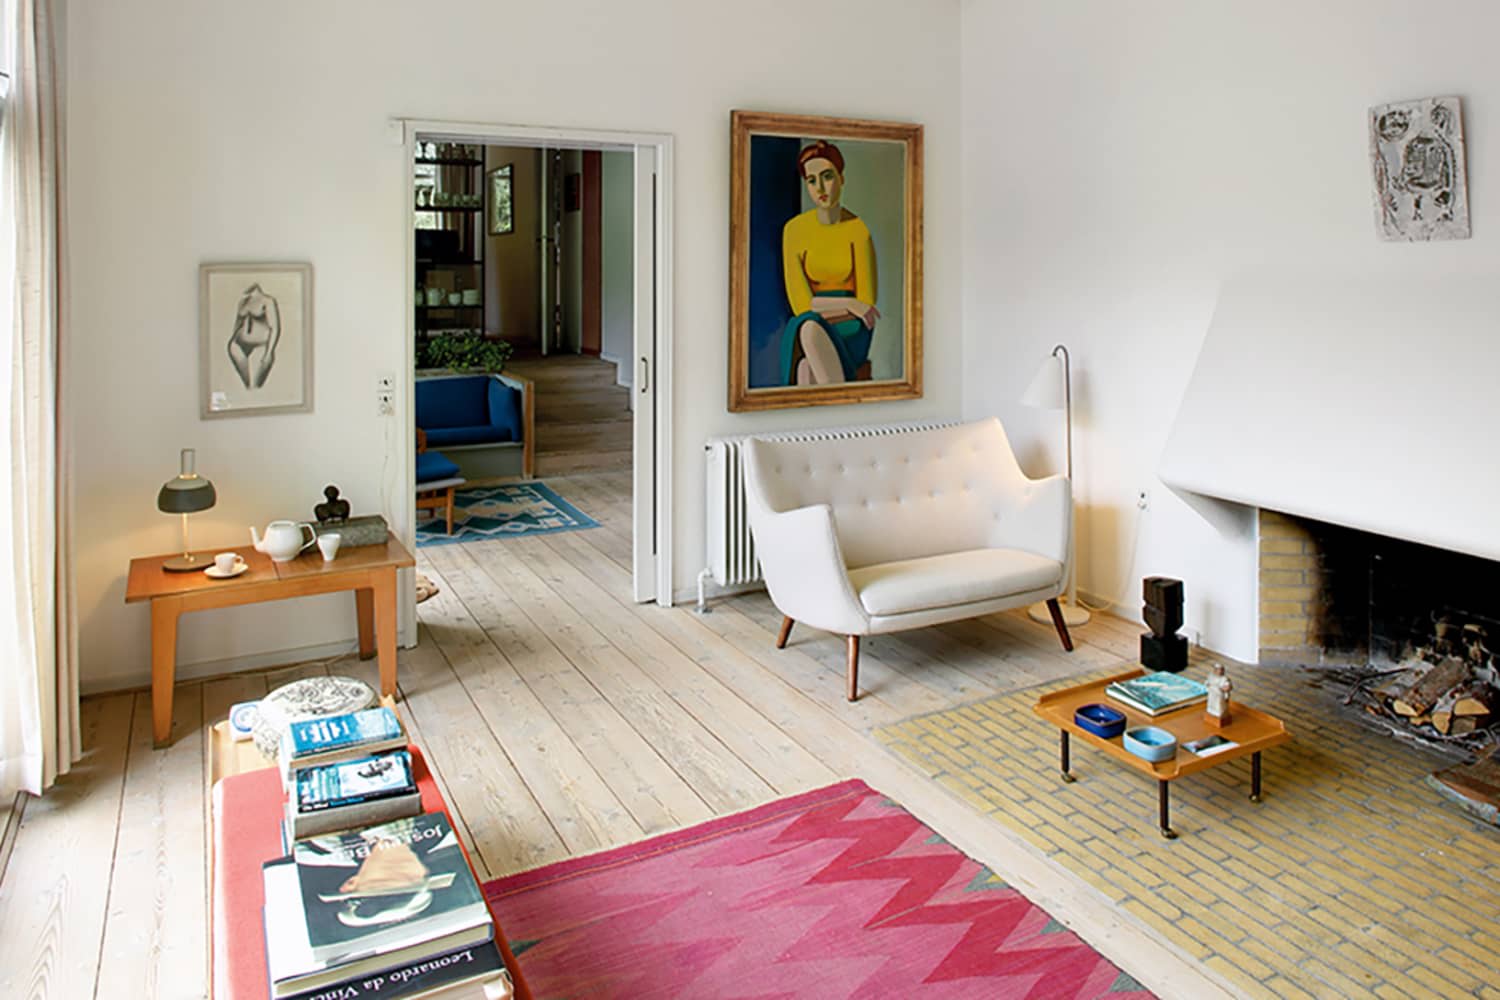 The Home of Designer Finn Juhl Is a Study in Timelessness (& Perfectly Placed Furniture)